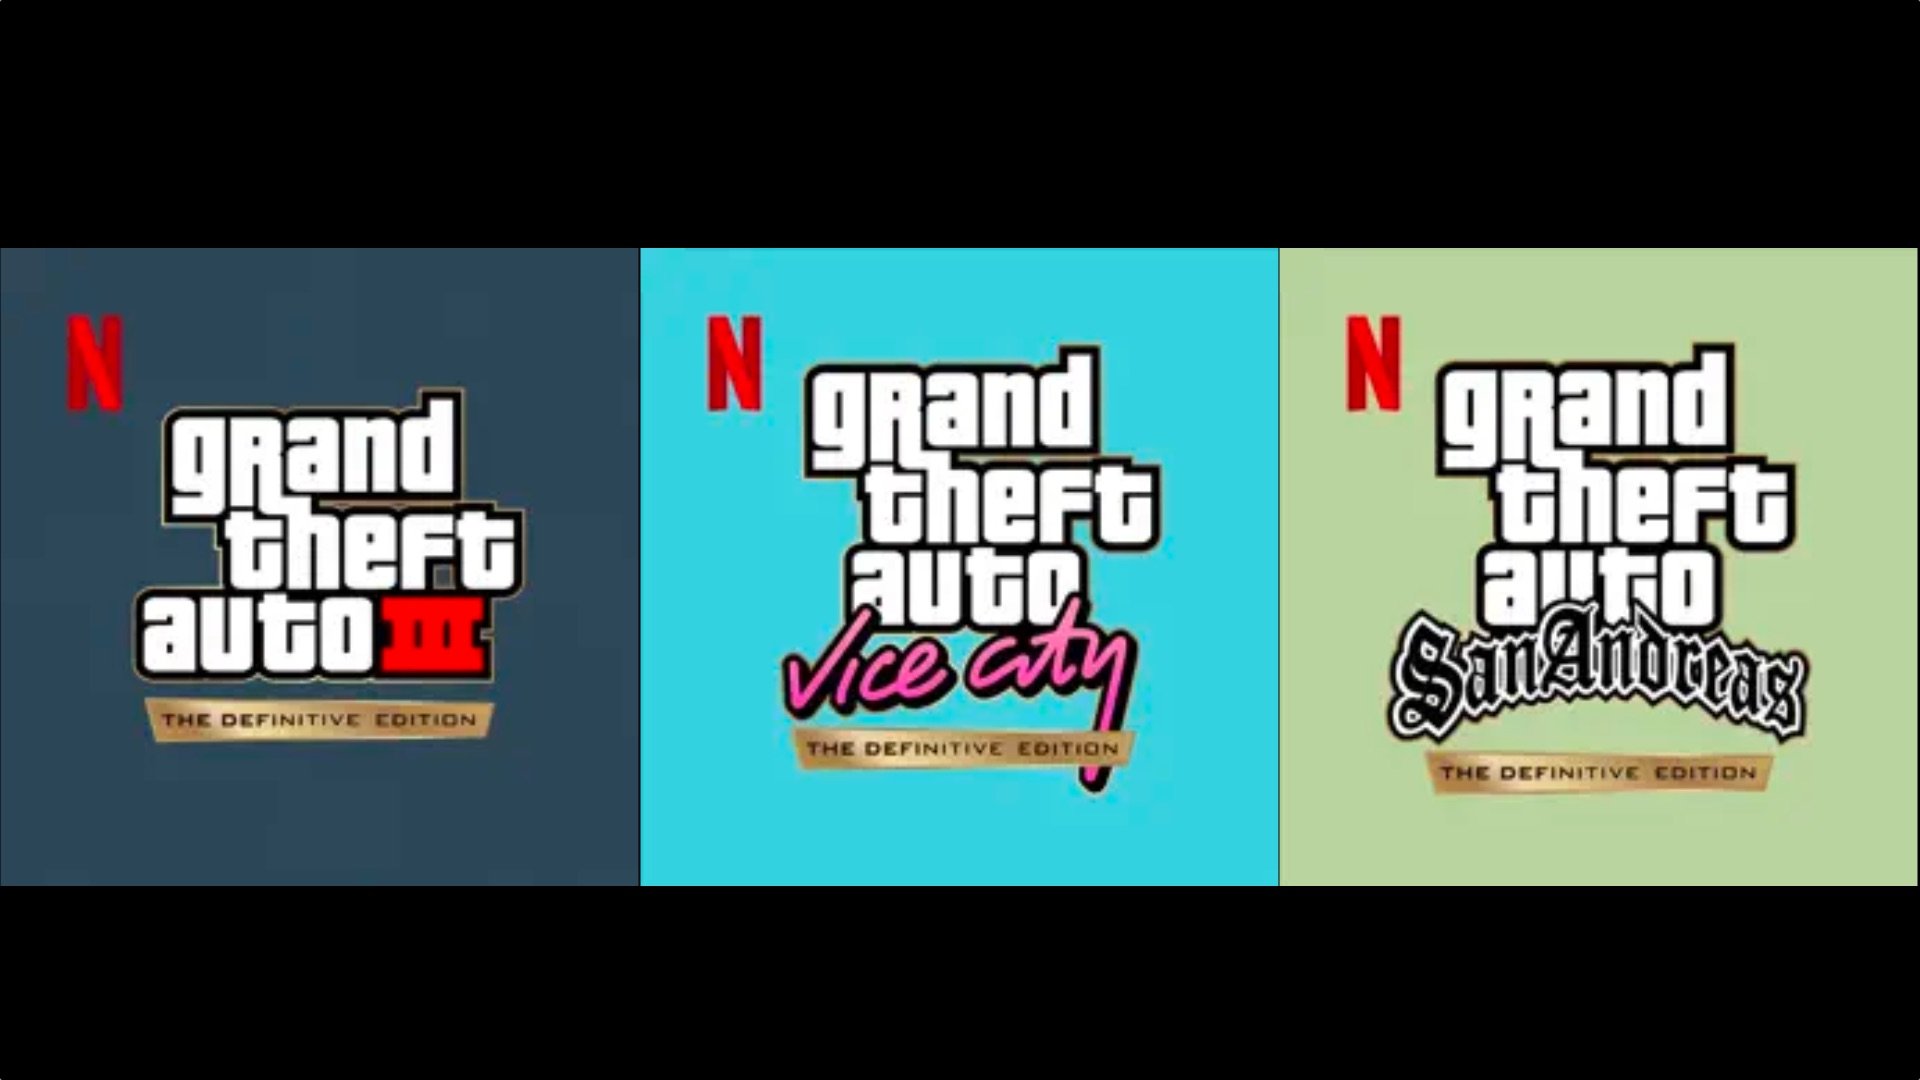 Grand Theft Auto 3 for iPhone - Download